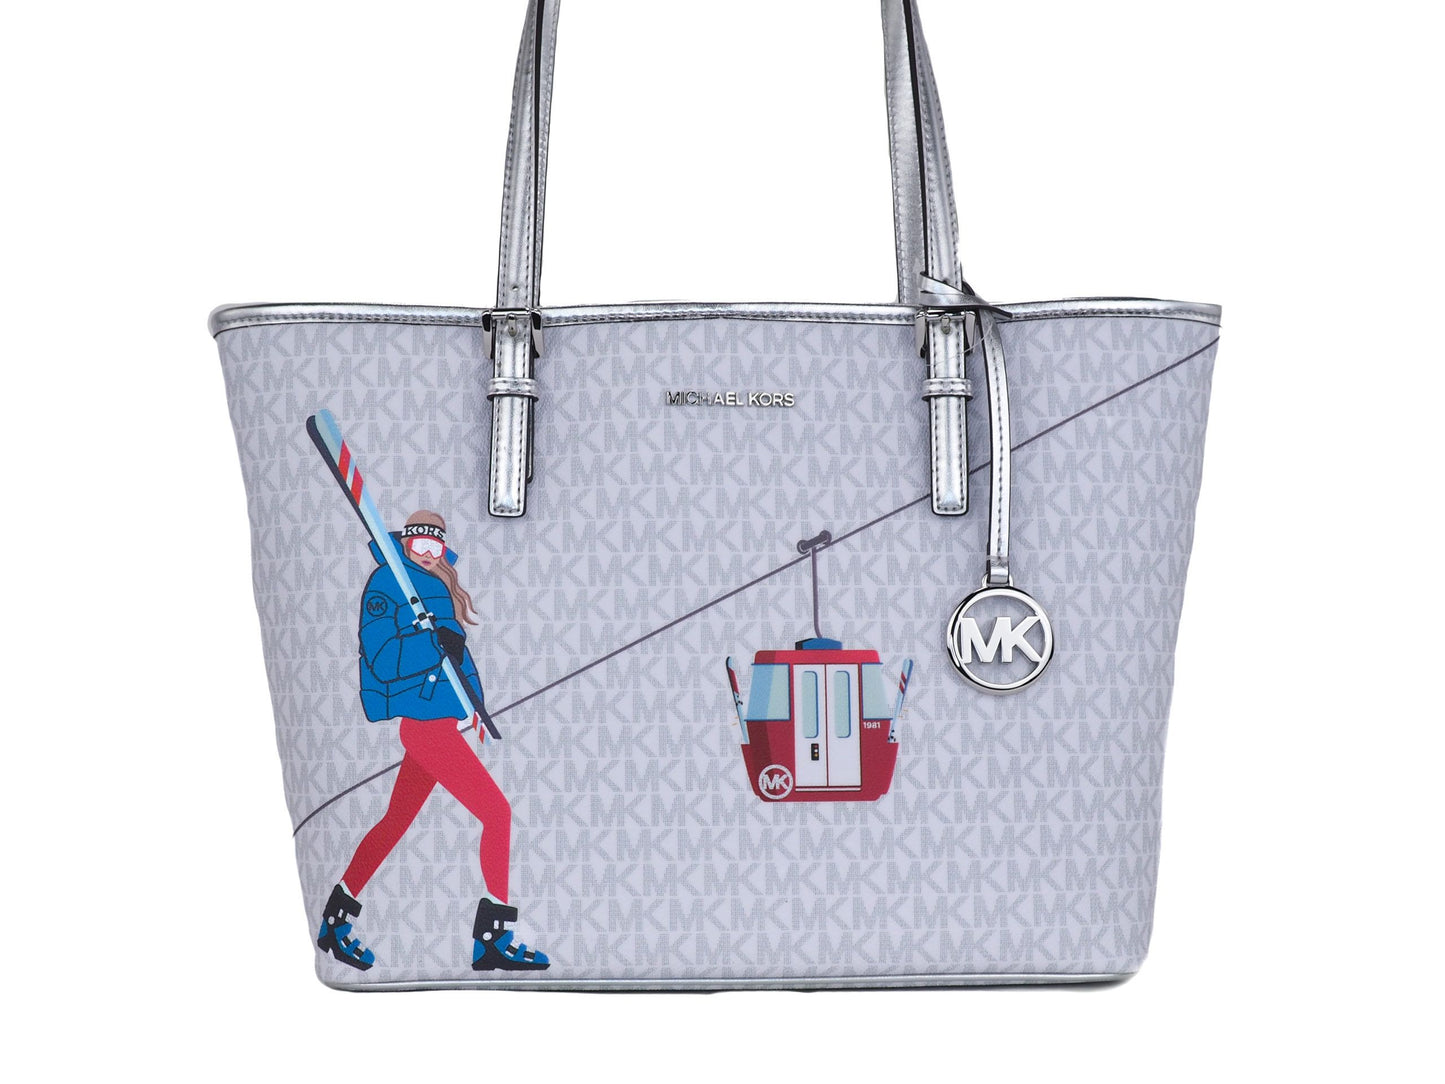 Jet Set Girls Print Medium Signature PVC Carryall Shoulder Tote Handbag (Bright White Multi) - Designed by Michael Kors Available to Buy at a Discounted Price on Moon Behind The Hill Online D